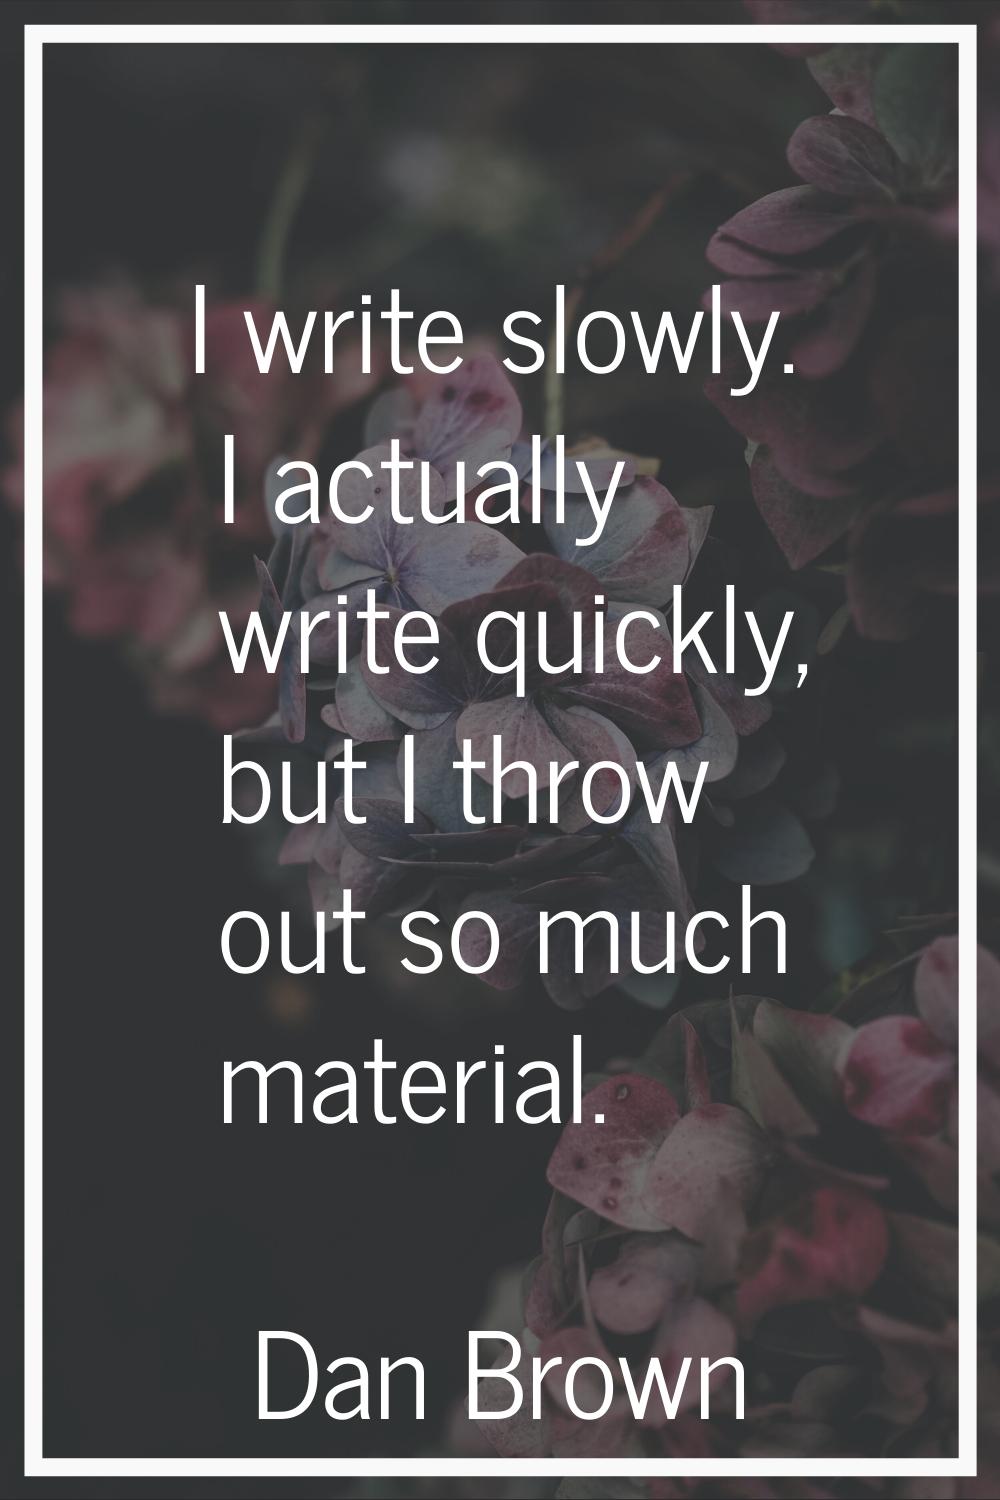 I write slowly. I actually write quickly, but I throw out so much material.